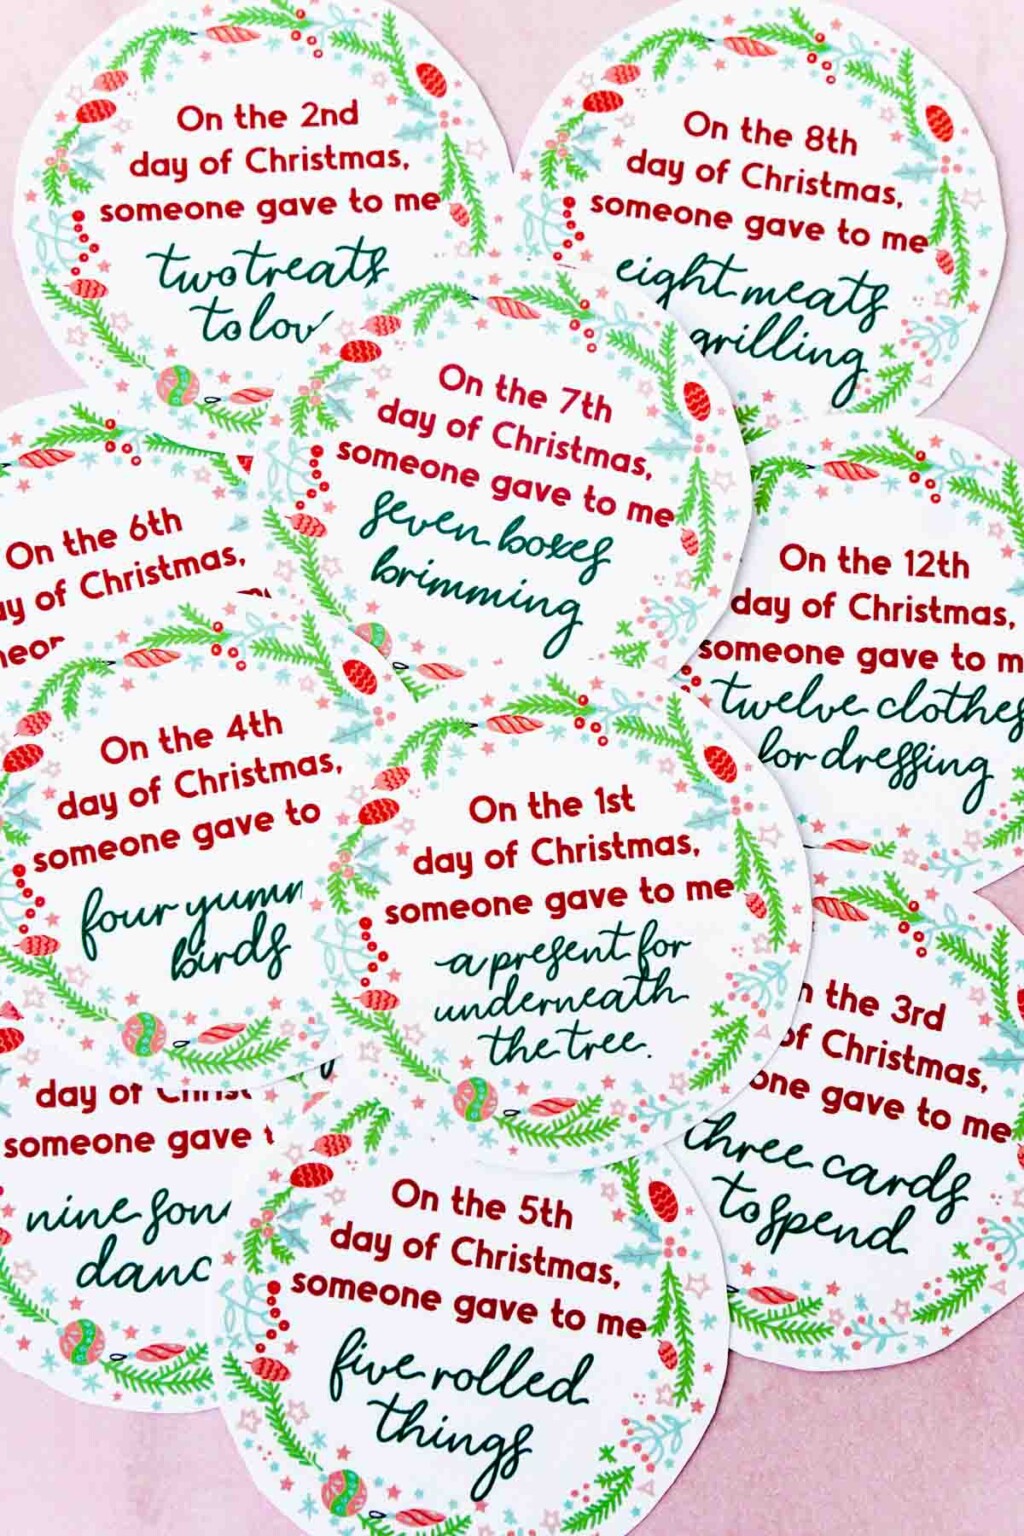 creative-12-days-of-christmas-gifts-free-gift-tags-play-party-plan